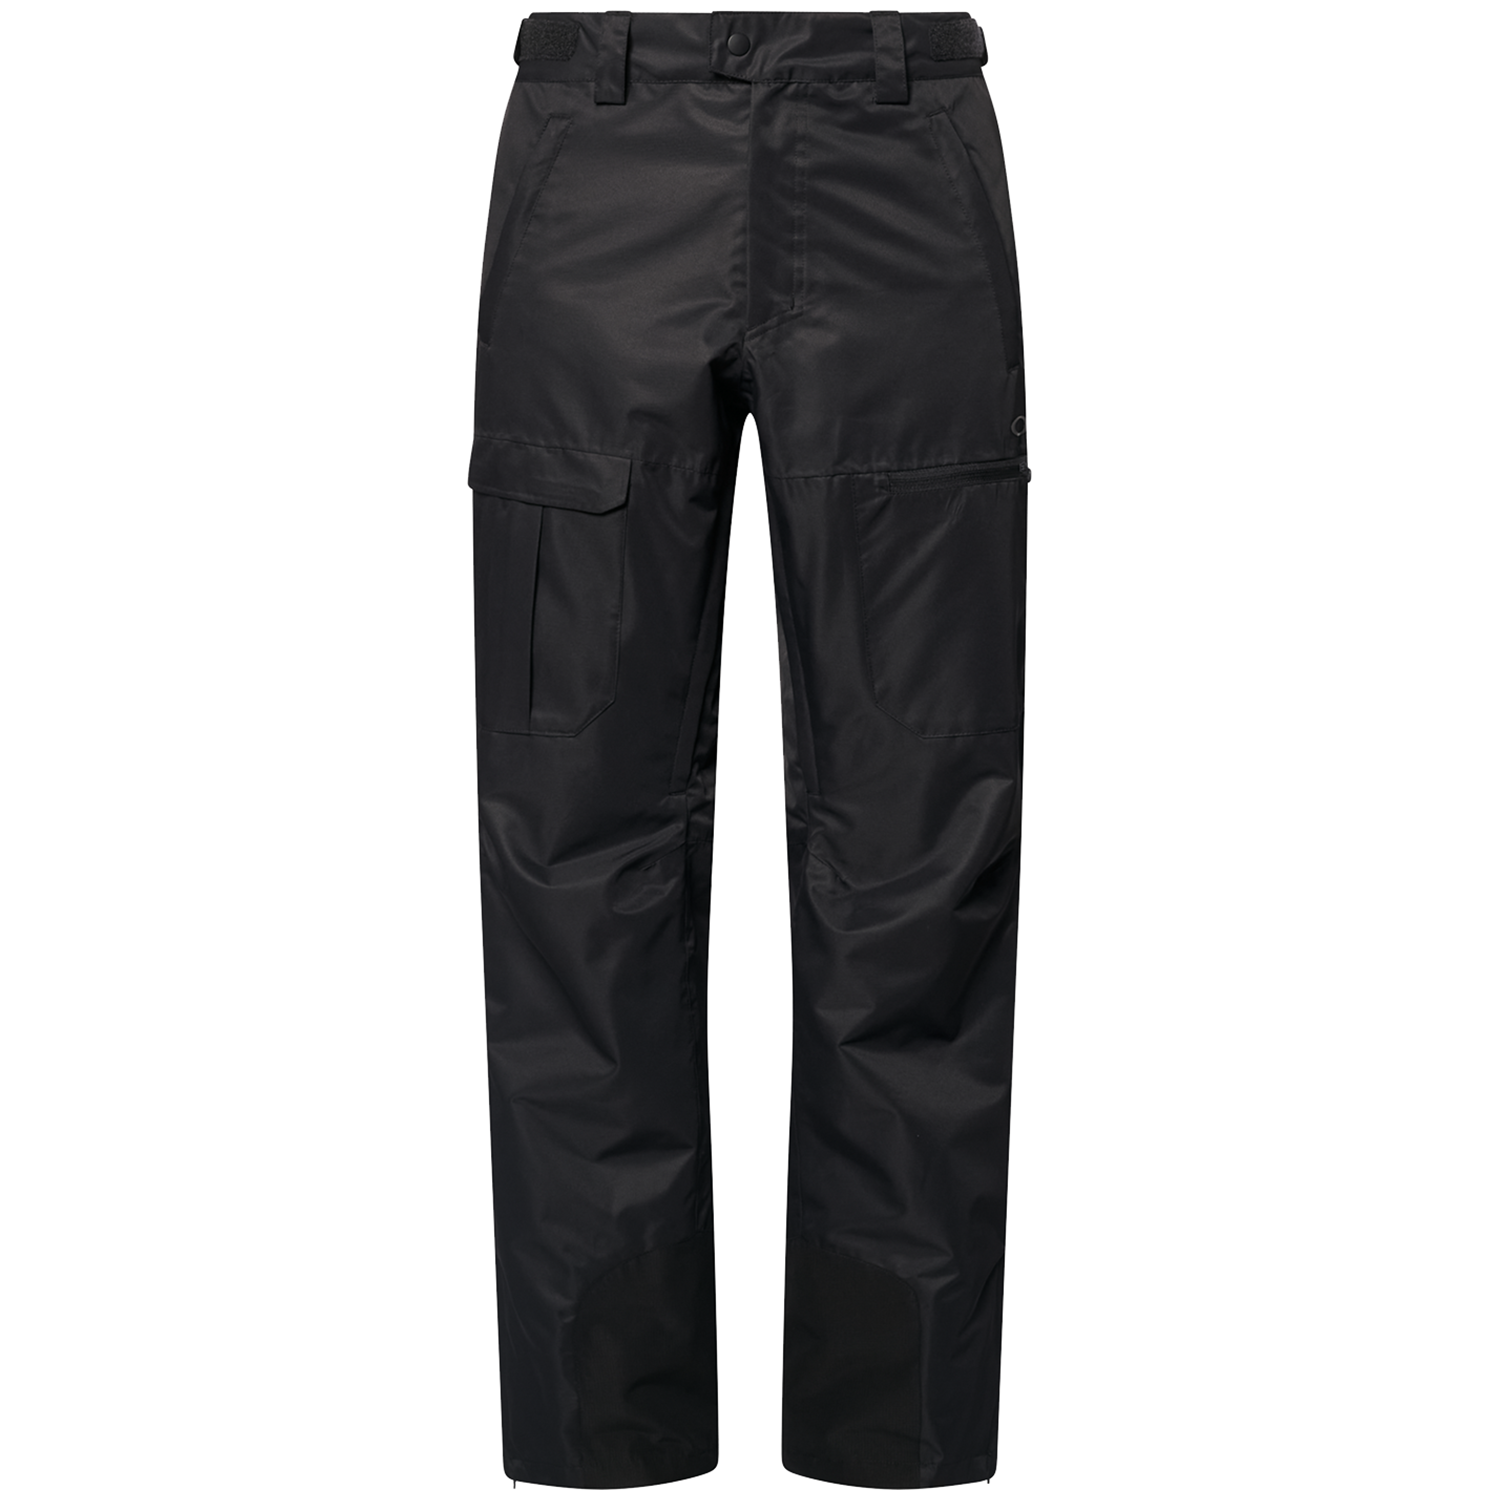 Брюки Oakley Divisional Cargo Shell, цвет Blackout cargo pants size m